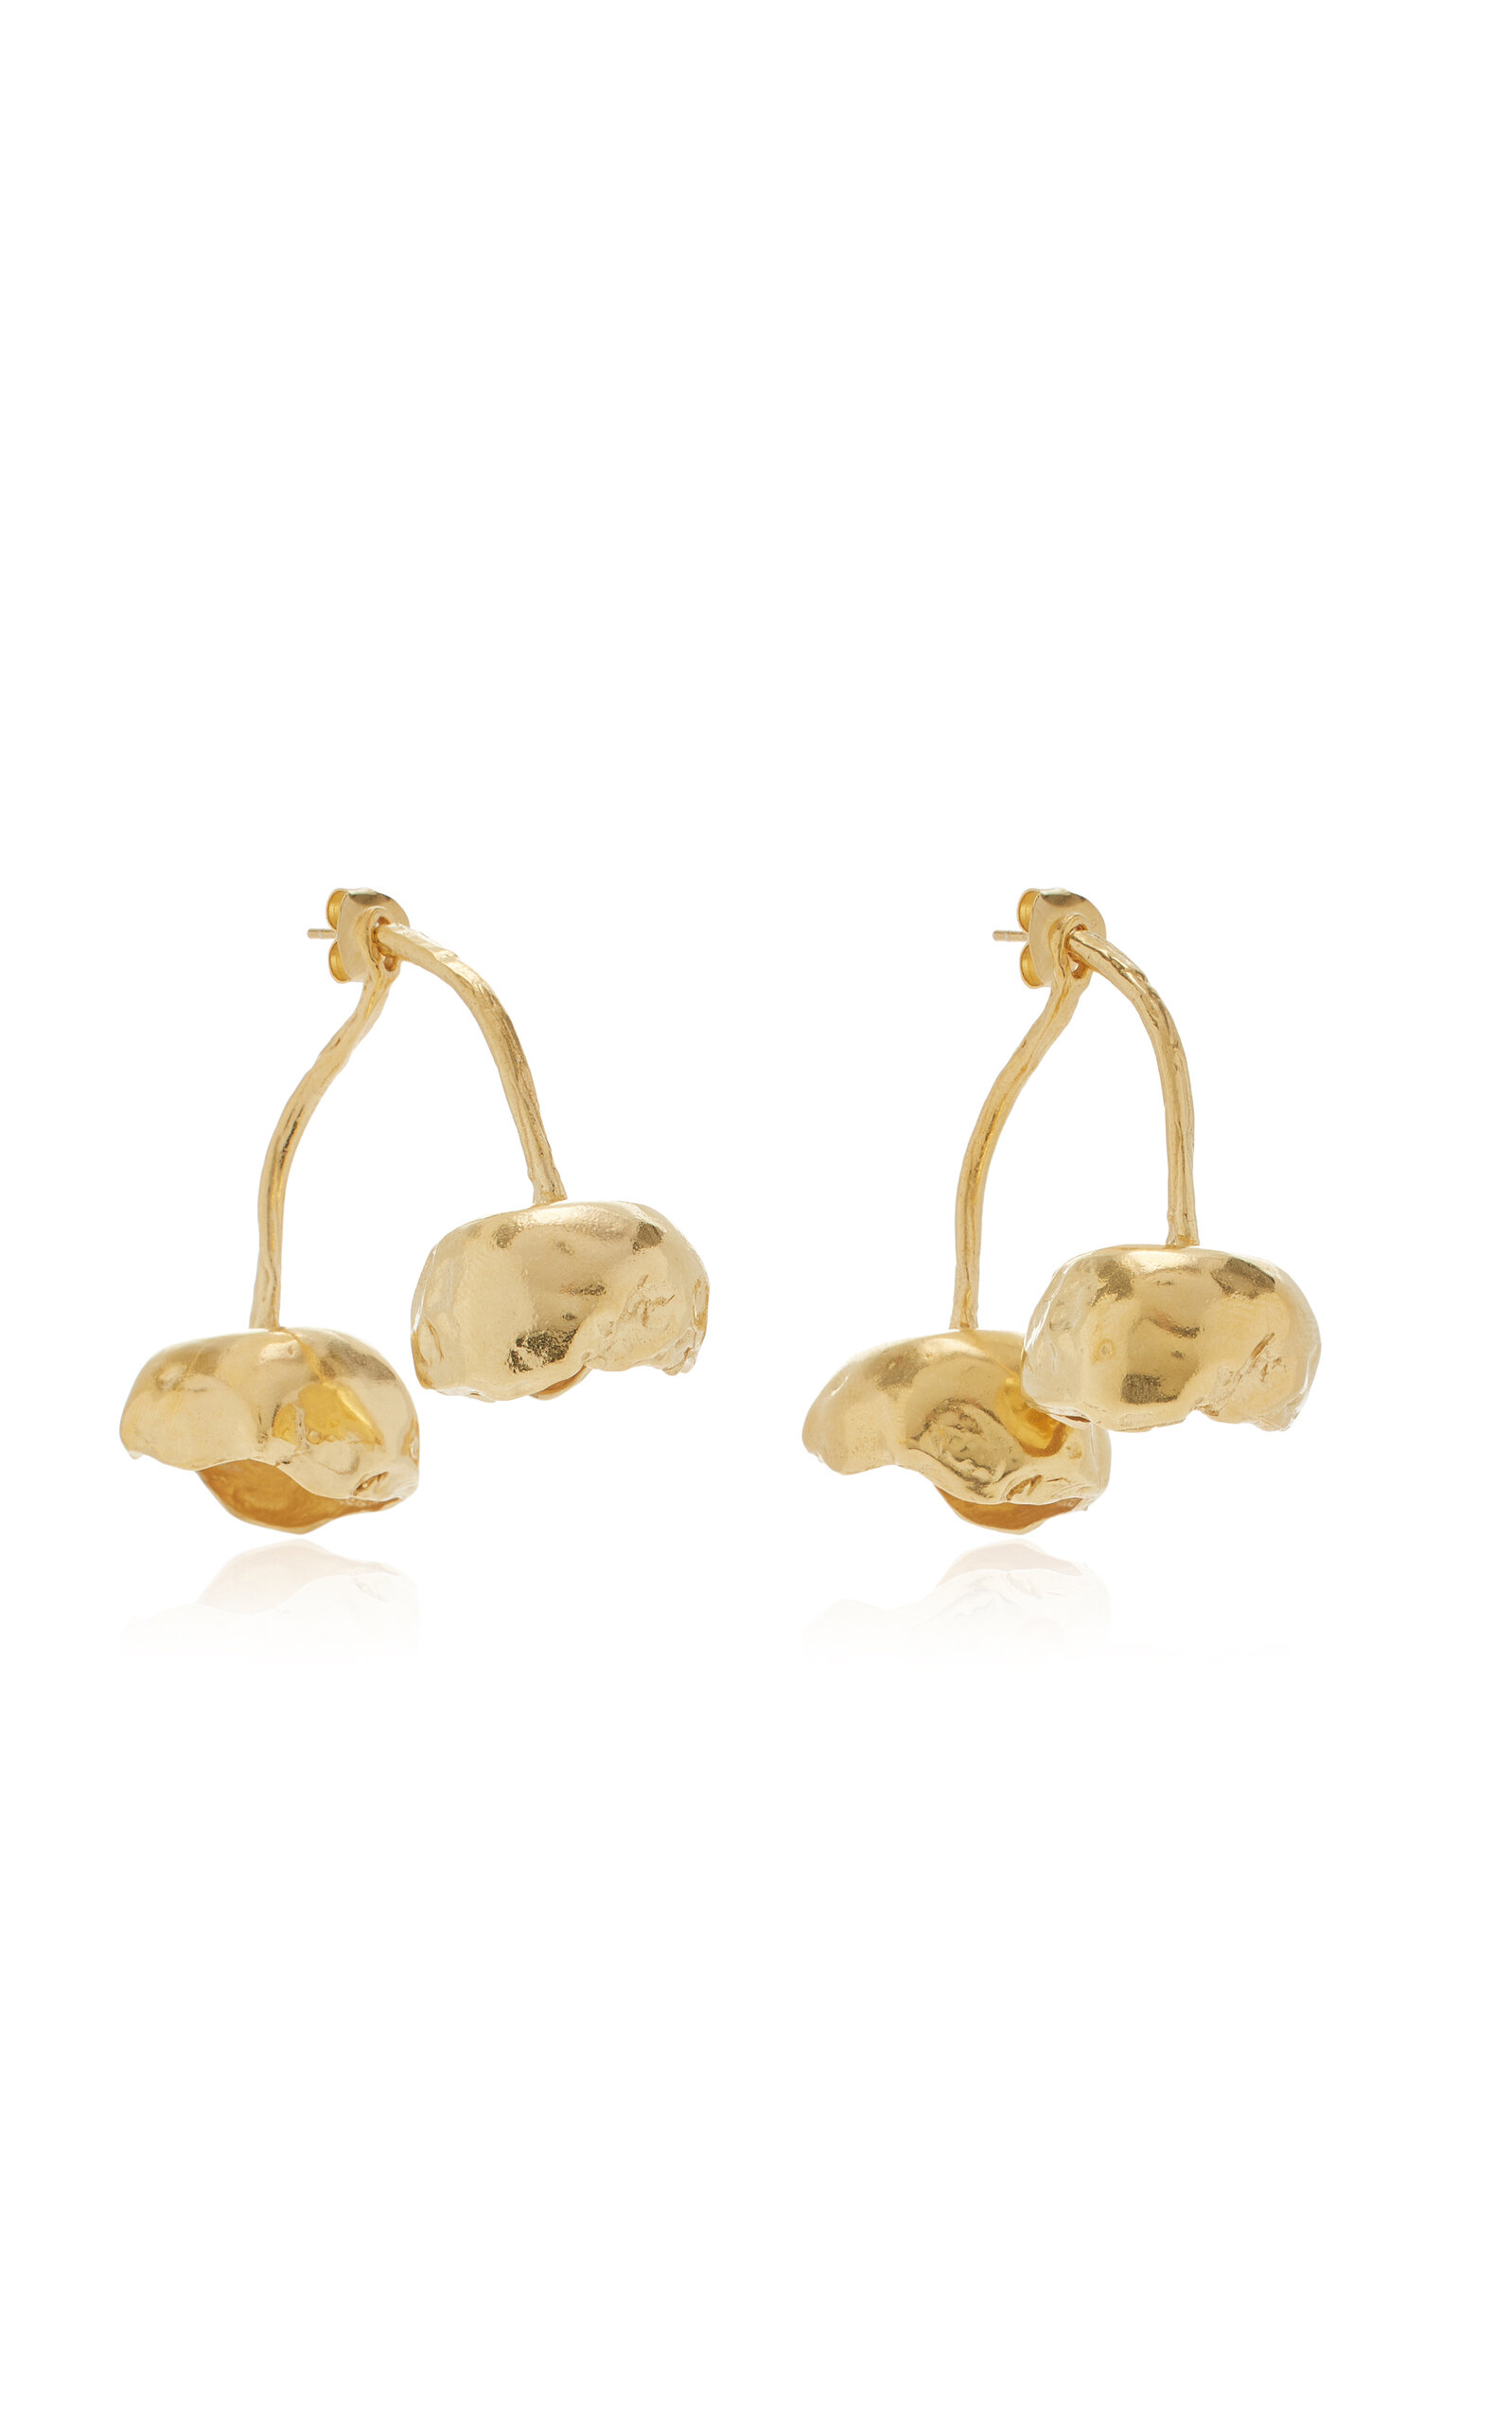 Cerezas 18K Gold-Plated Earrings